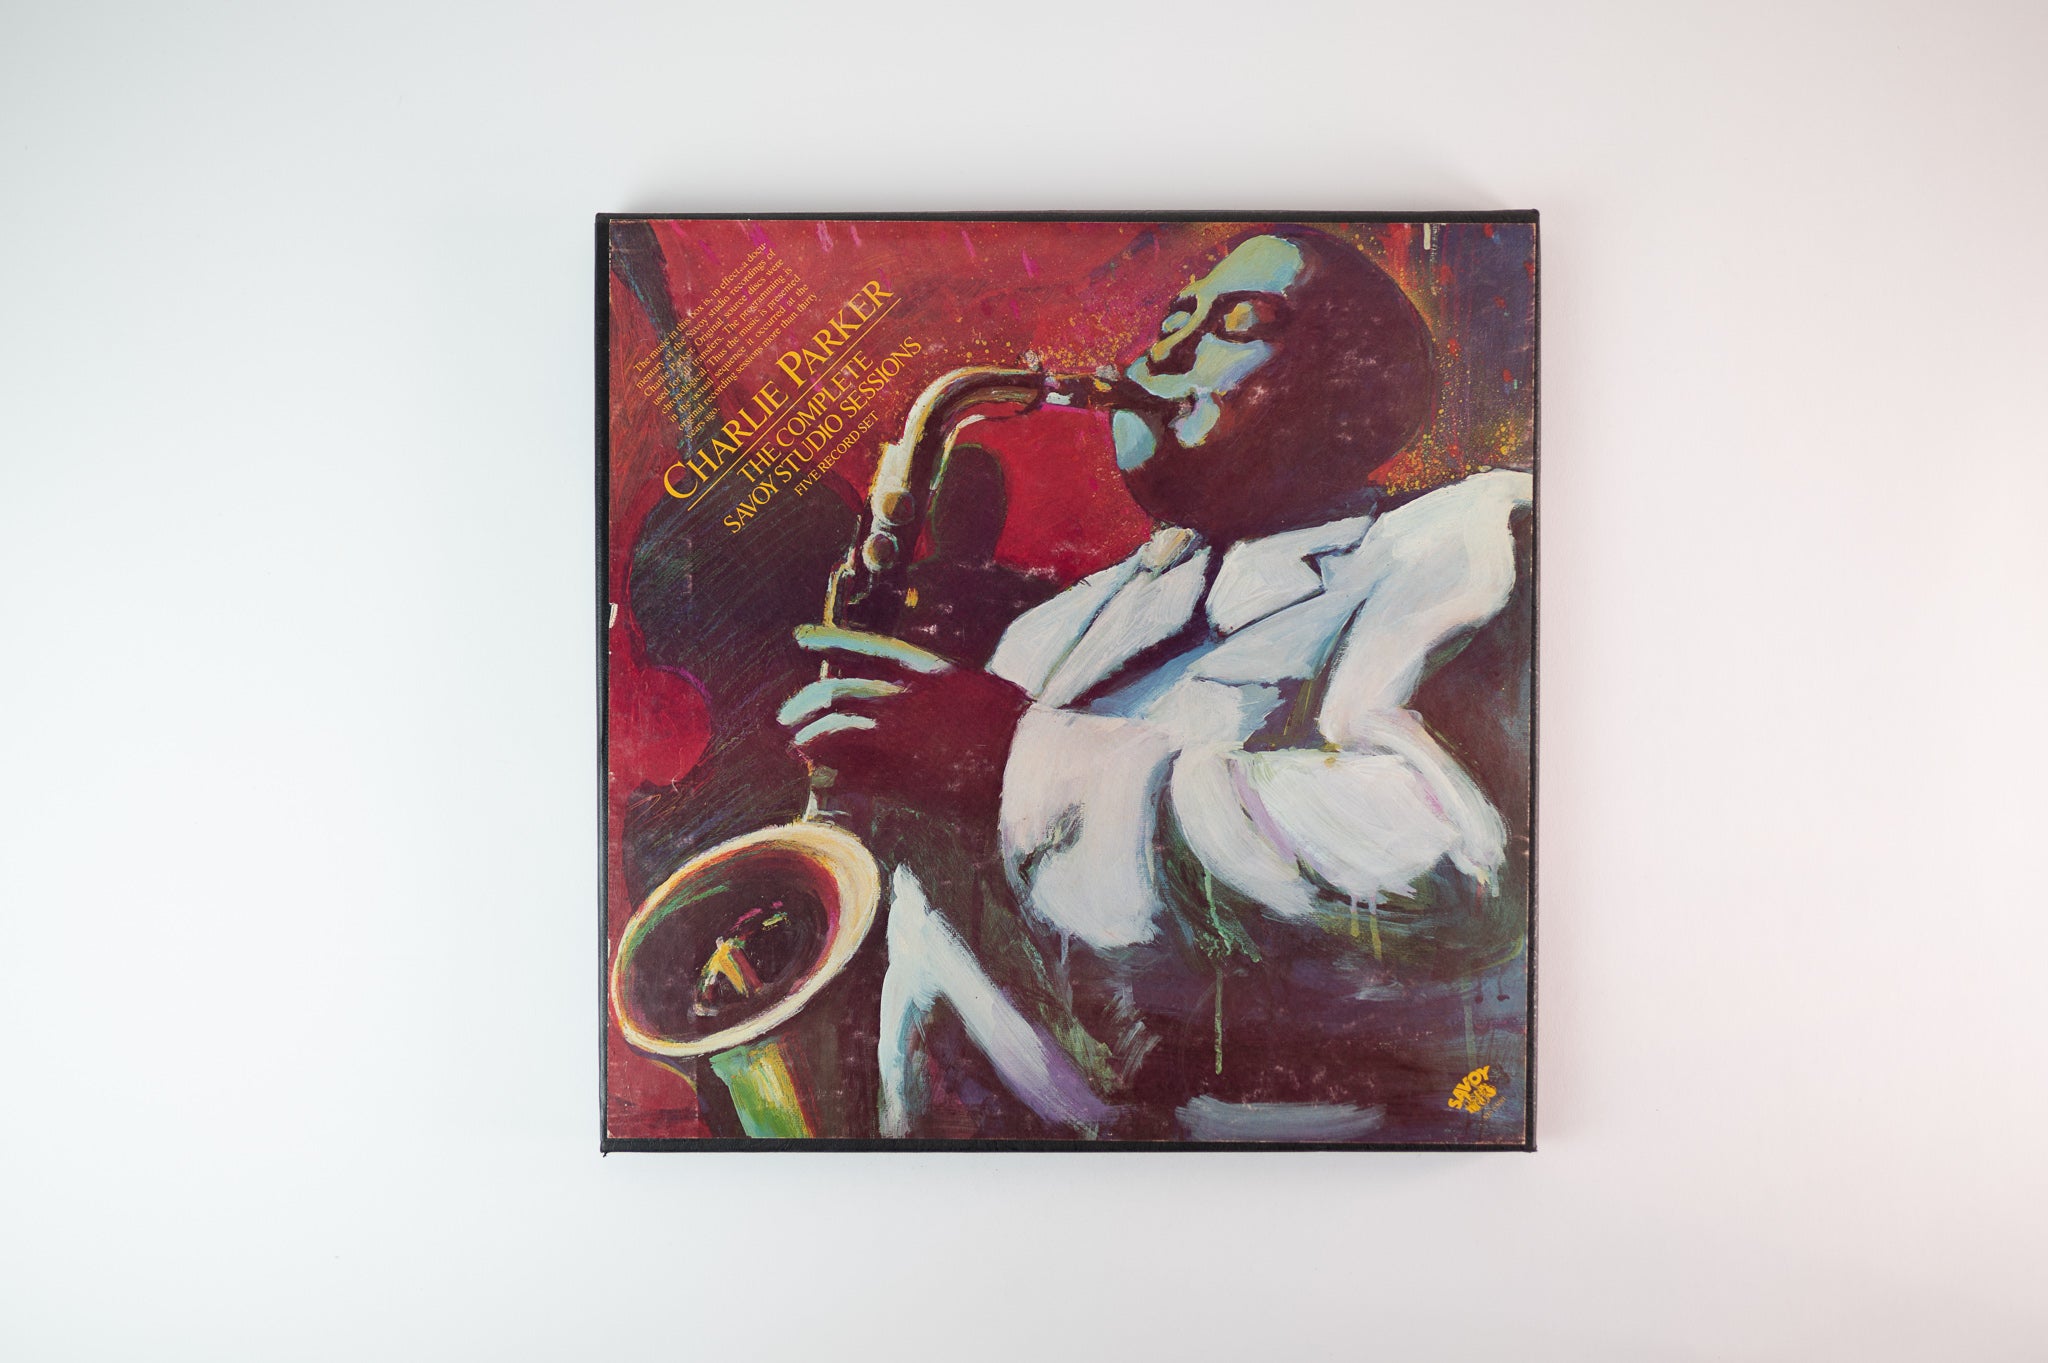 Charlie Parker - The Complete Savoy Studio Sessions on Savoy Box Set